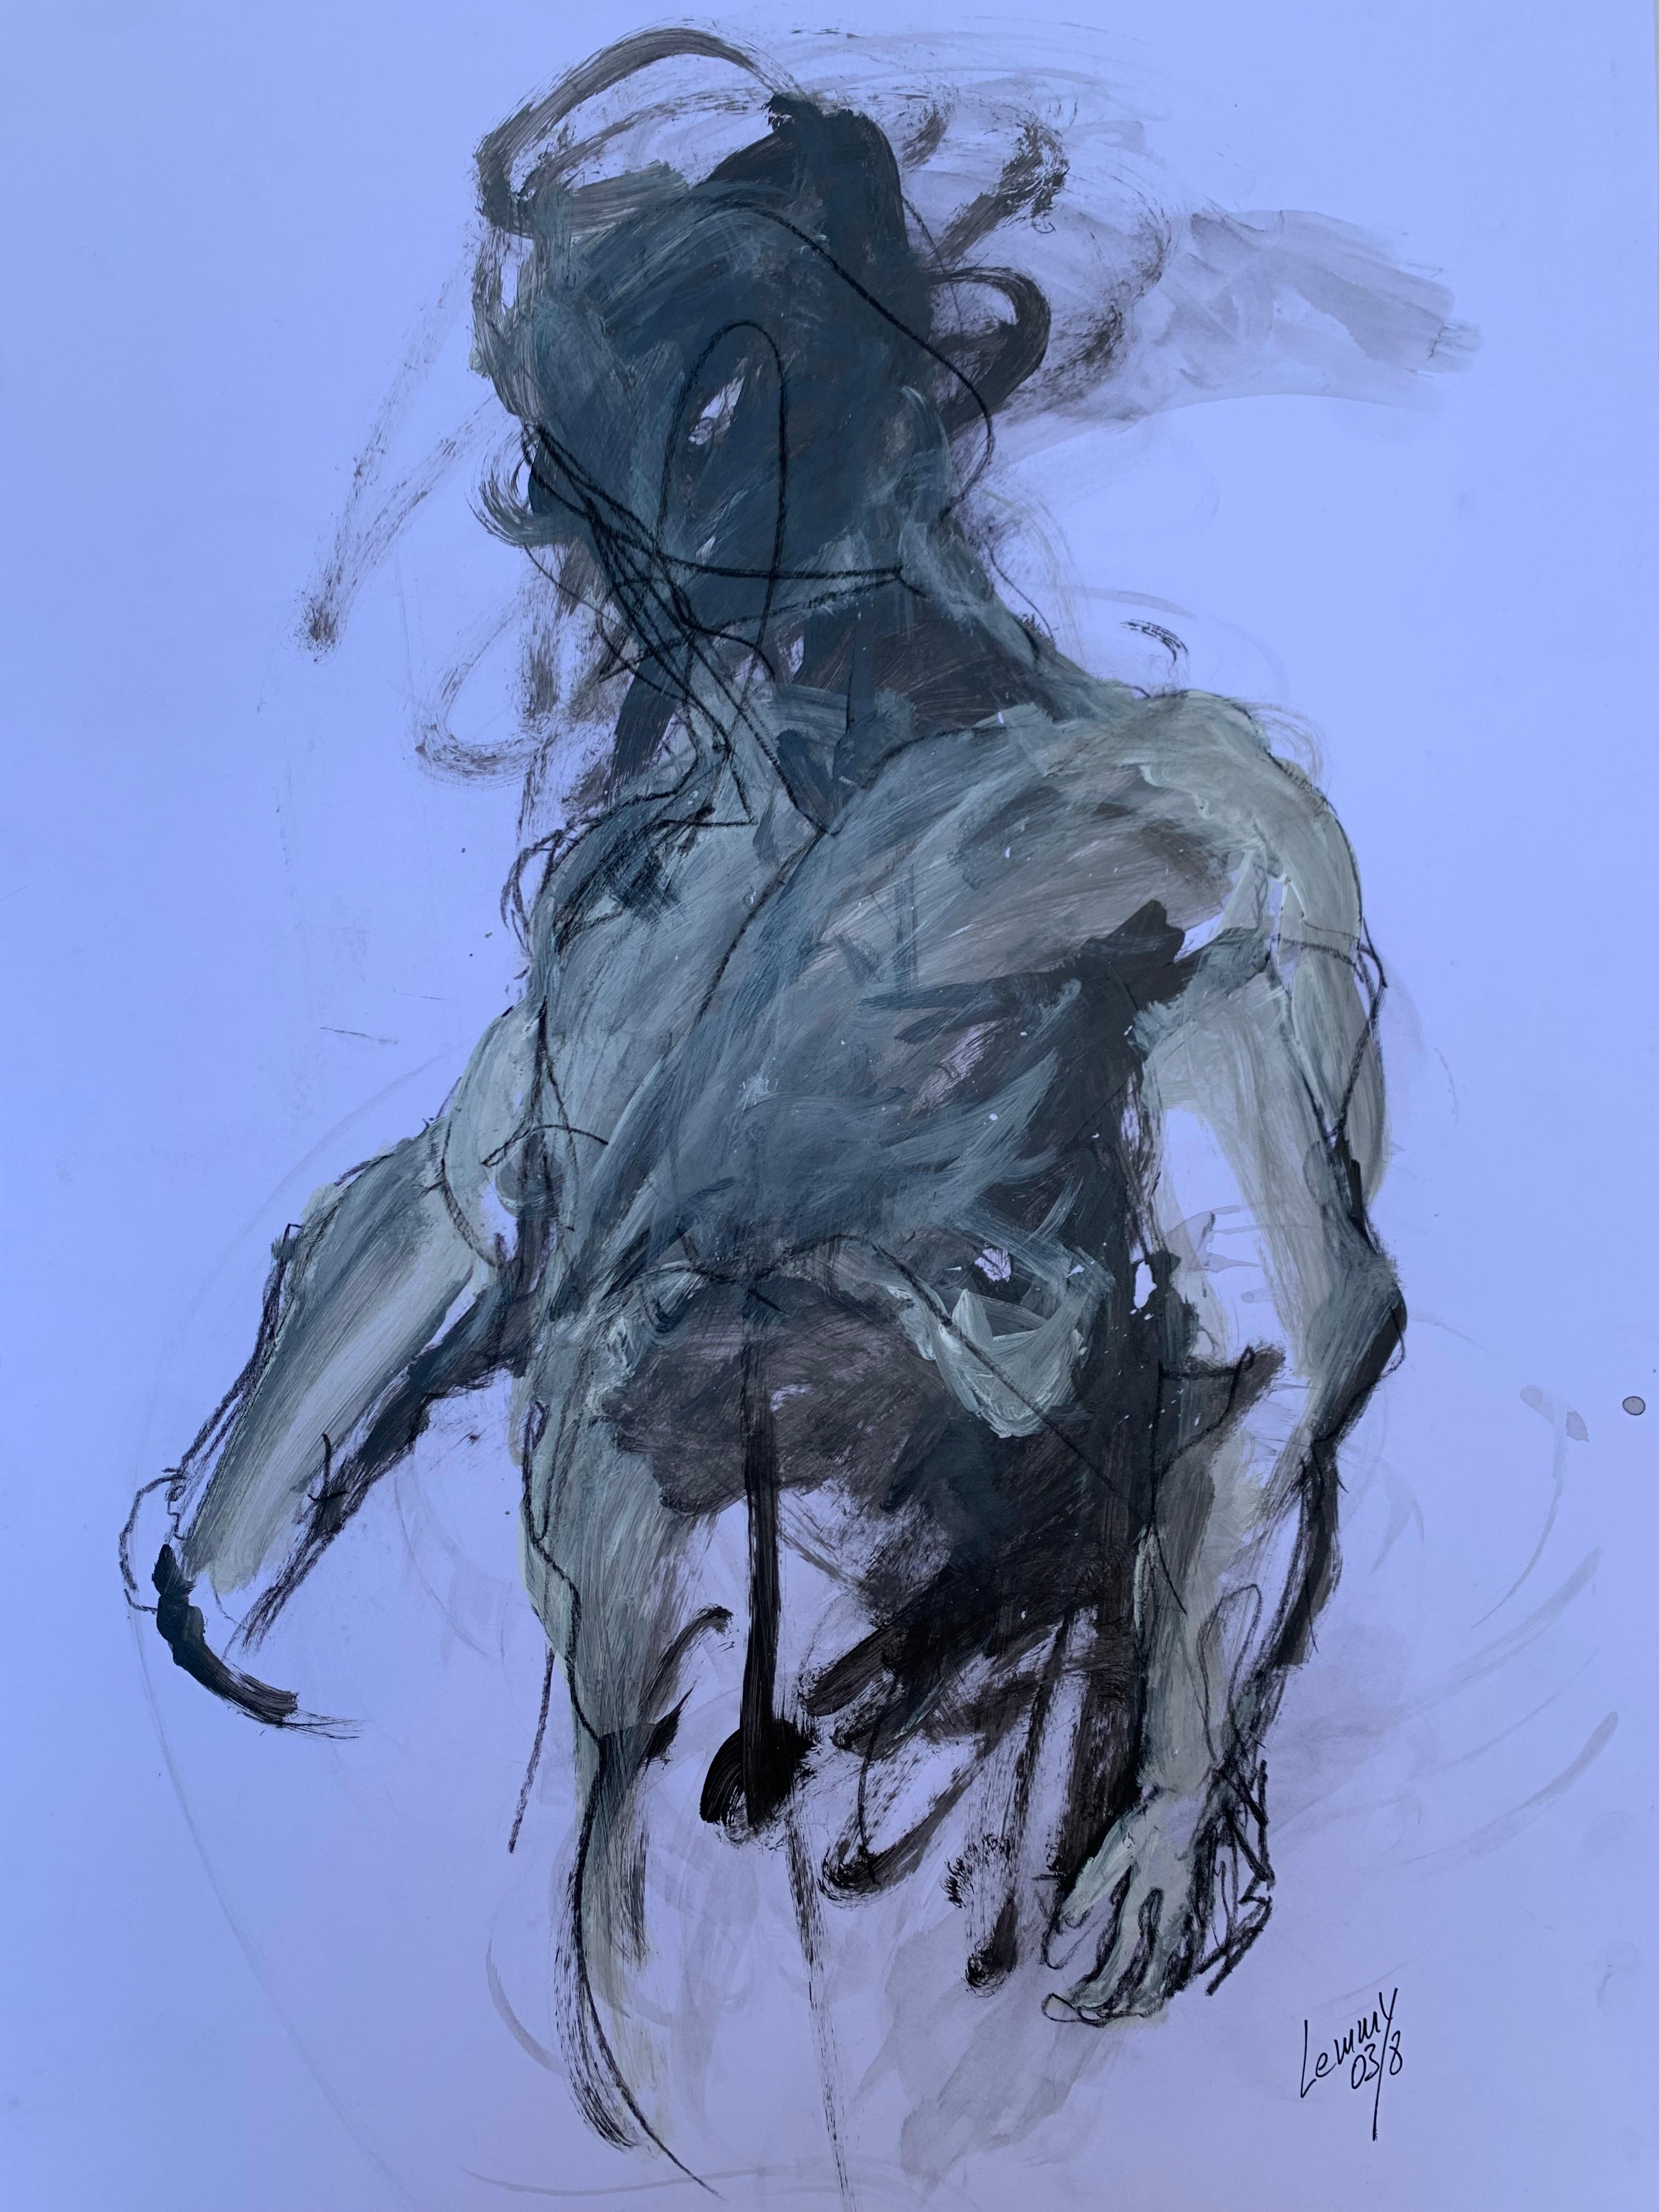 Lemmy Gonthier - Body 6
Acrylic
Numbered and signed lower right of the work
Dimensions: 70 x 50
Circa 2014

The human body is at the center of Lemmy's work. His taste for large formats requires precision
striking anatomy. The movement that is